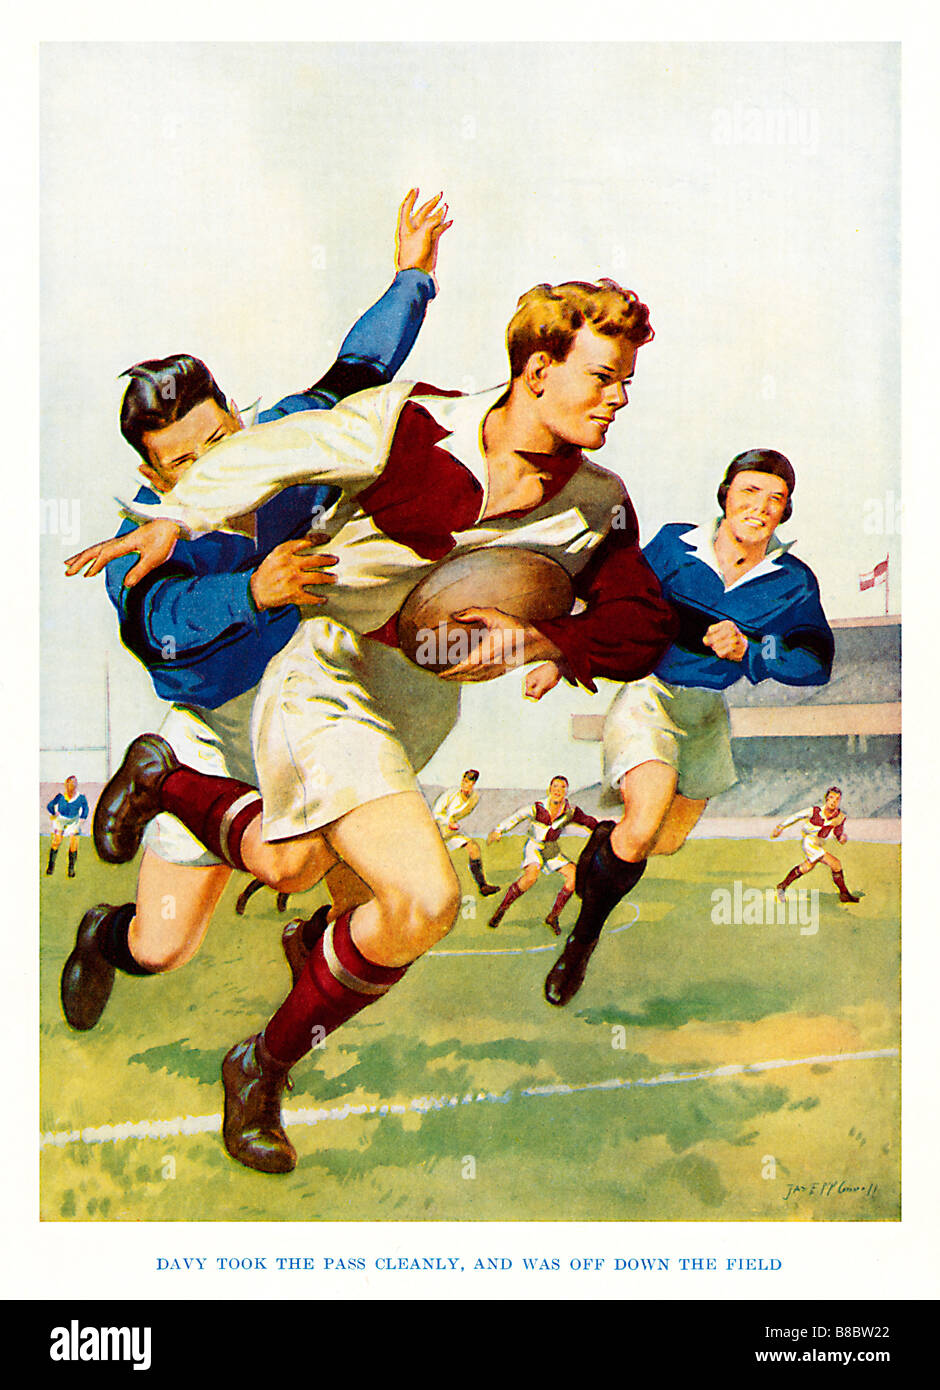 Davy Took The Pass Cleanly and was off down the field boys magazine illustration of a big rugby match Stock Photo